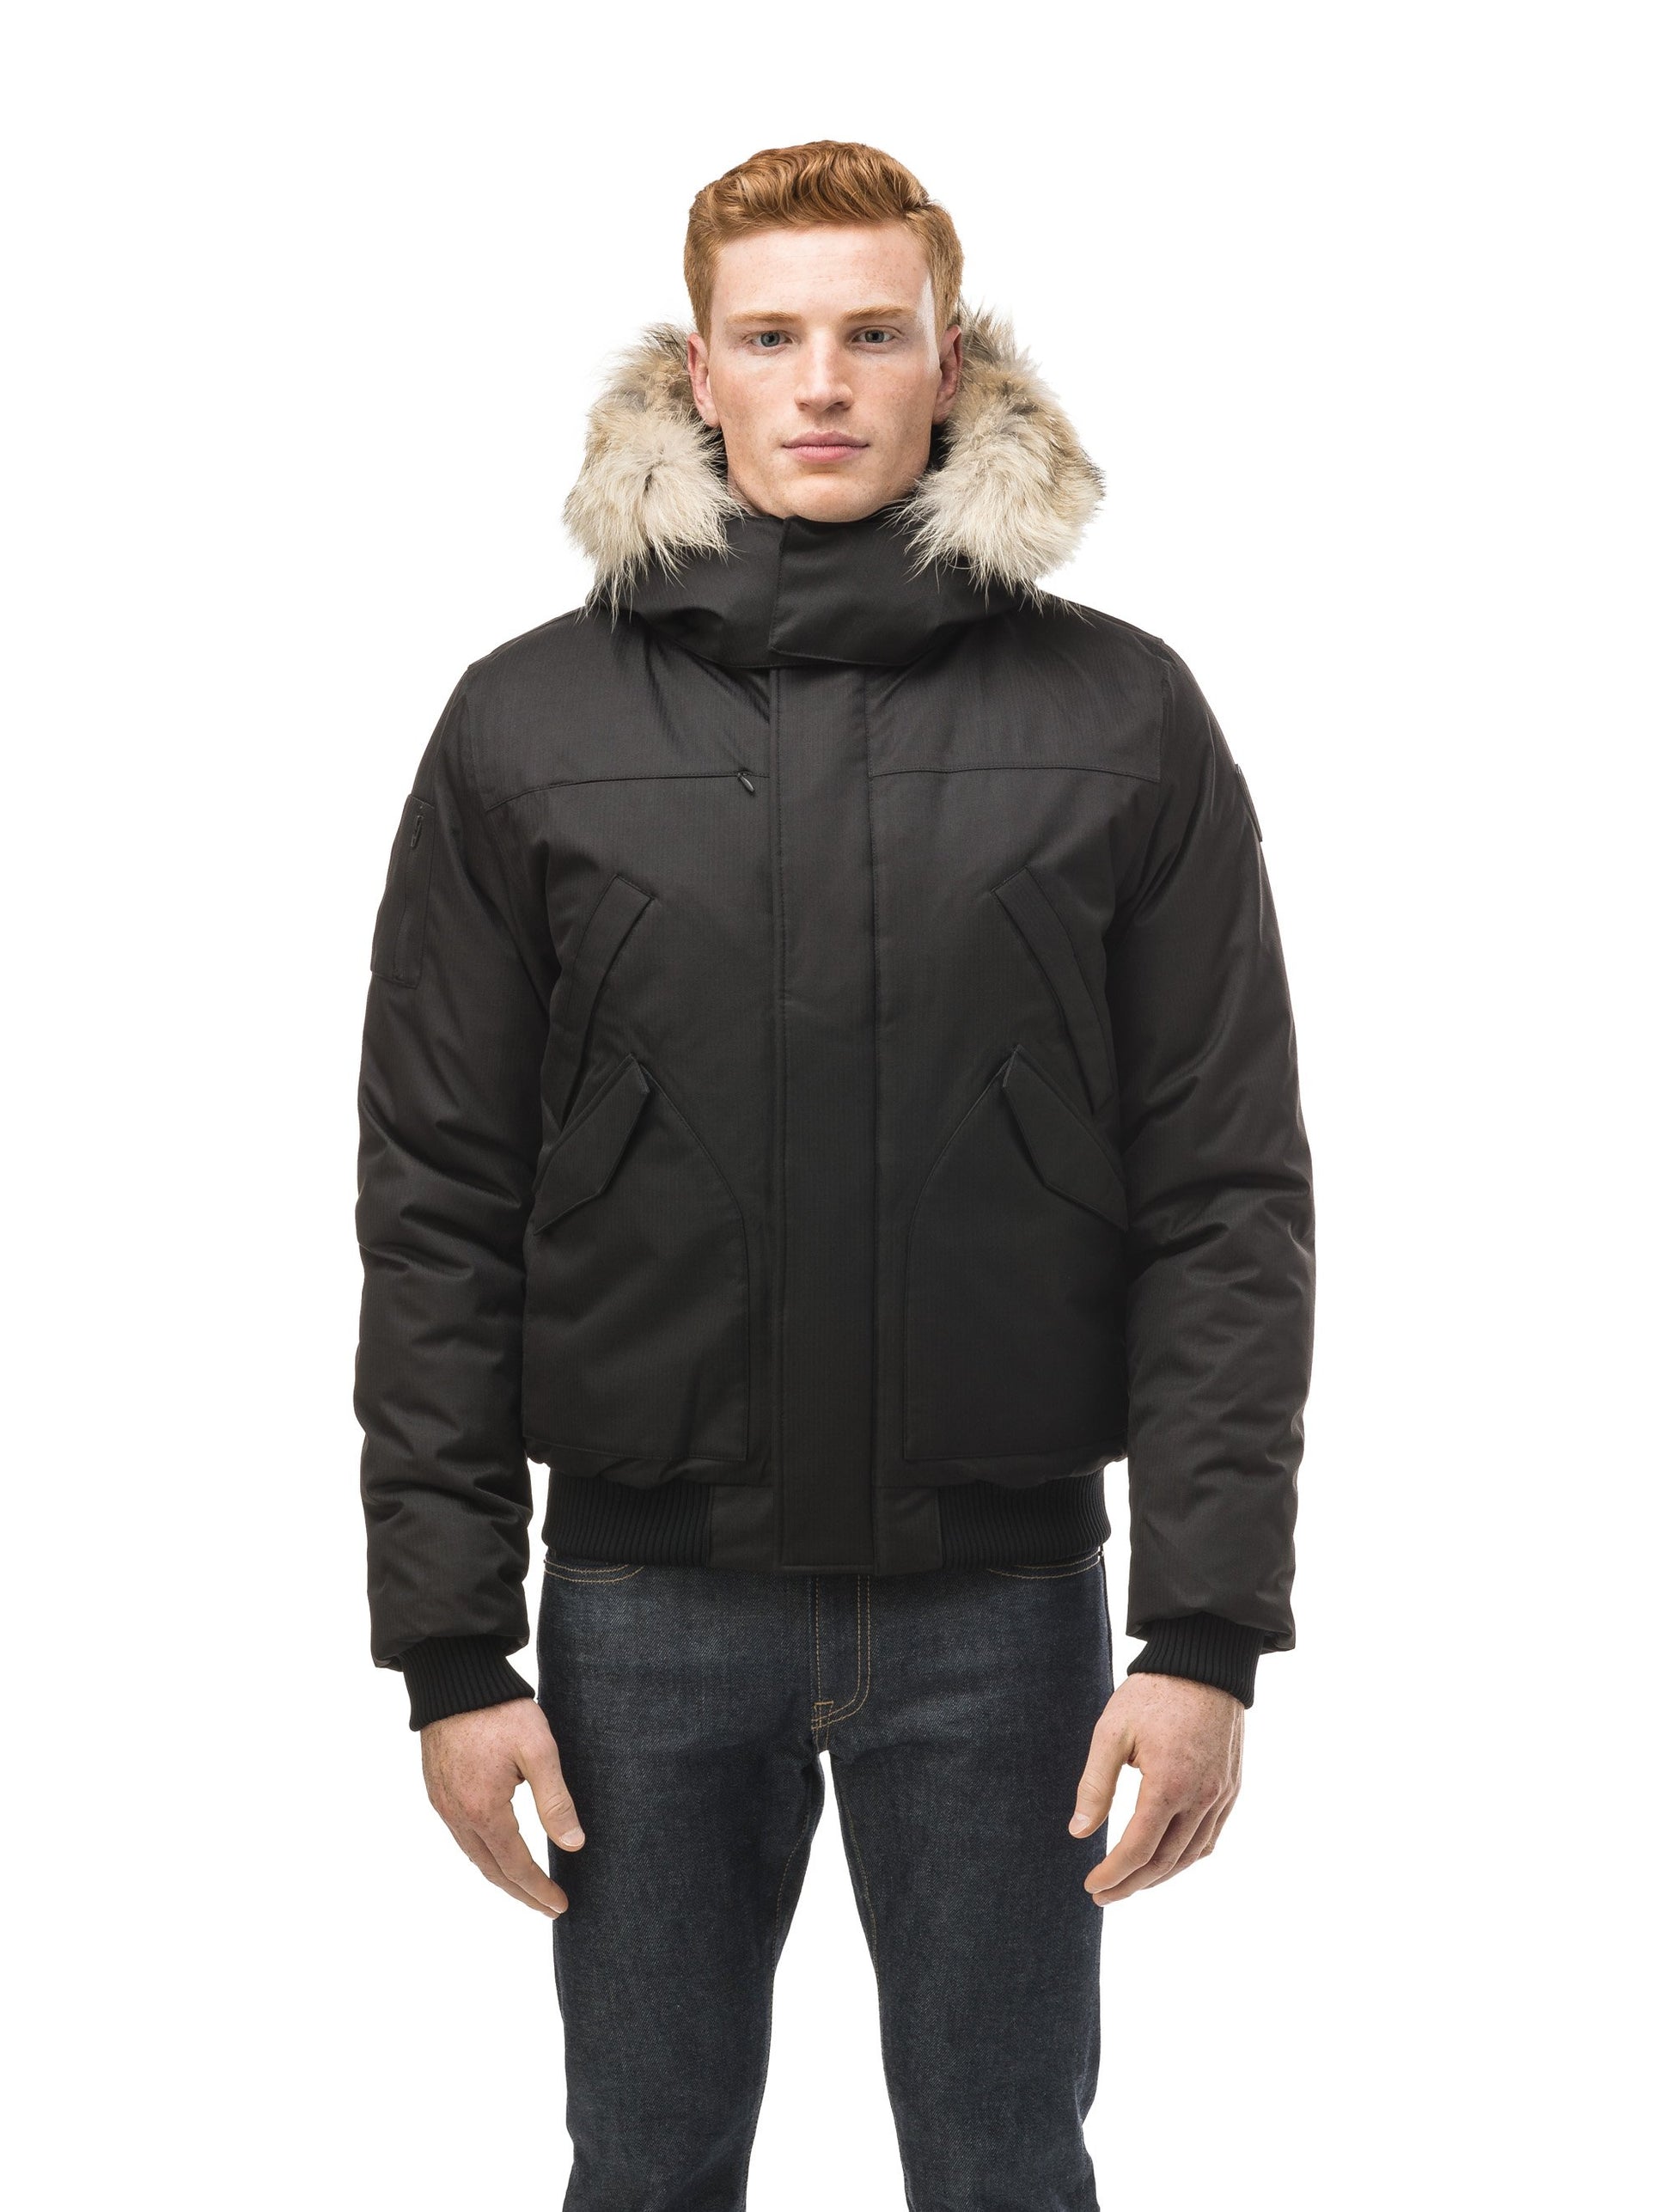 Men's classic down filled bomber jacket with a down filledÂ hood that features a removable coyote fur trim and concealed moldable framing wire in Black